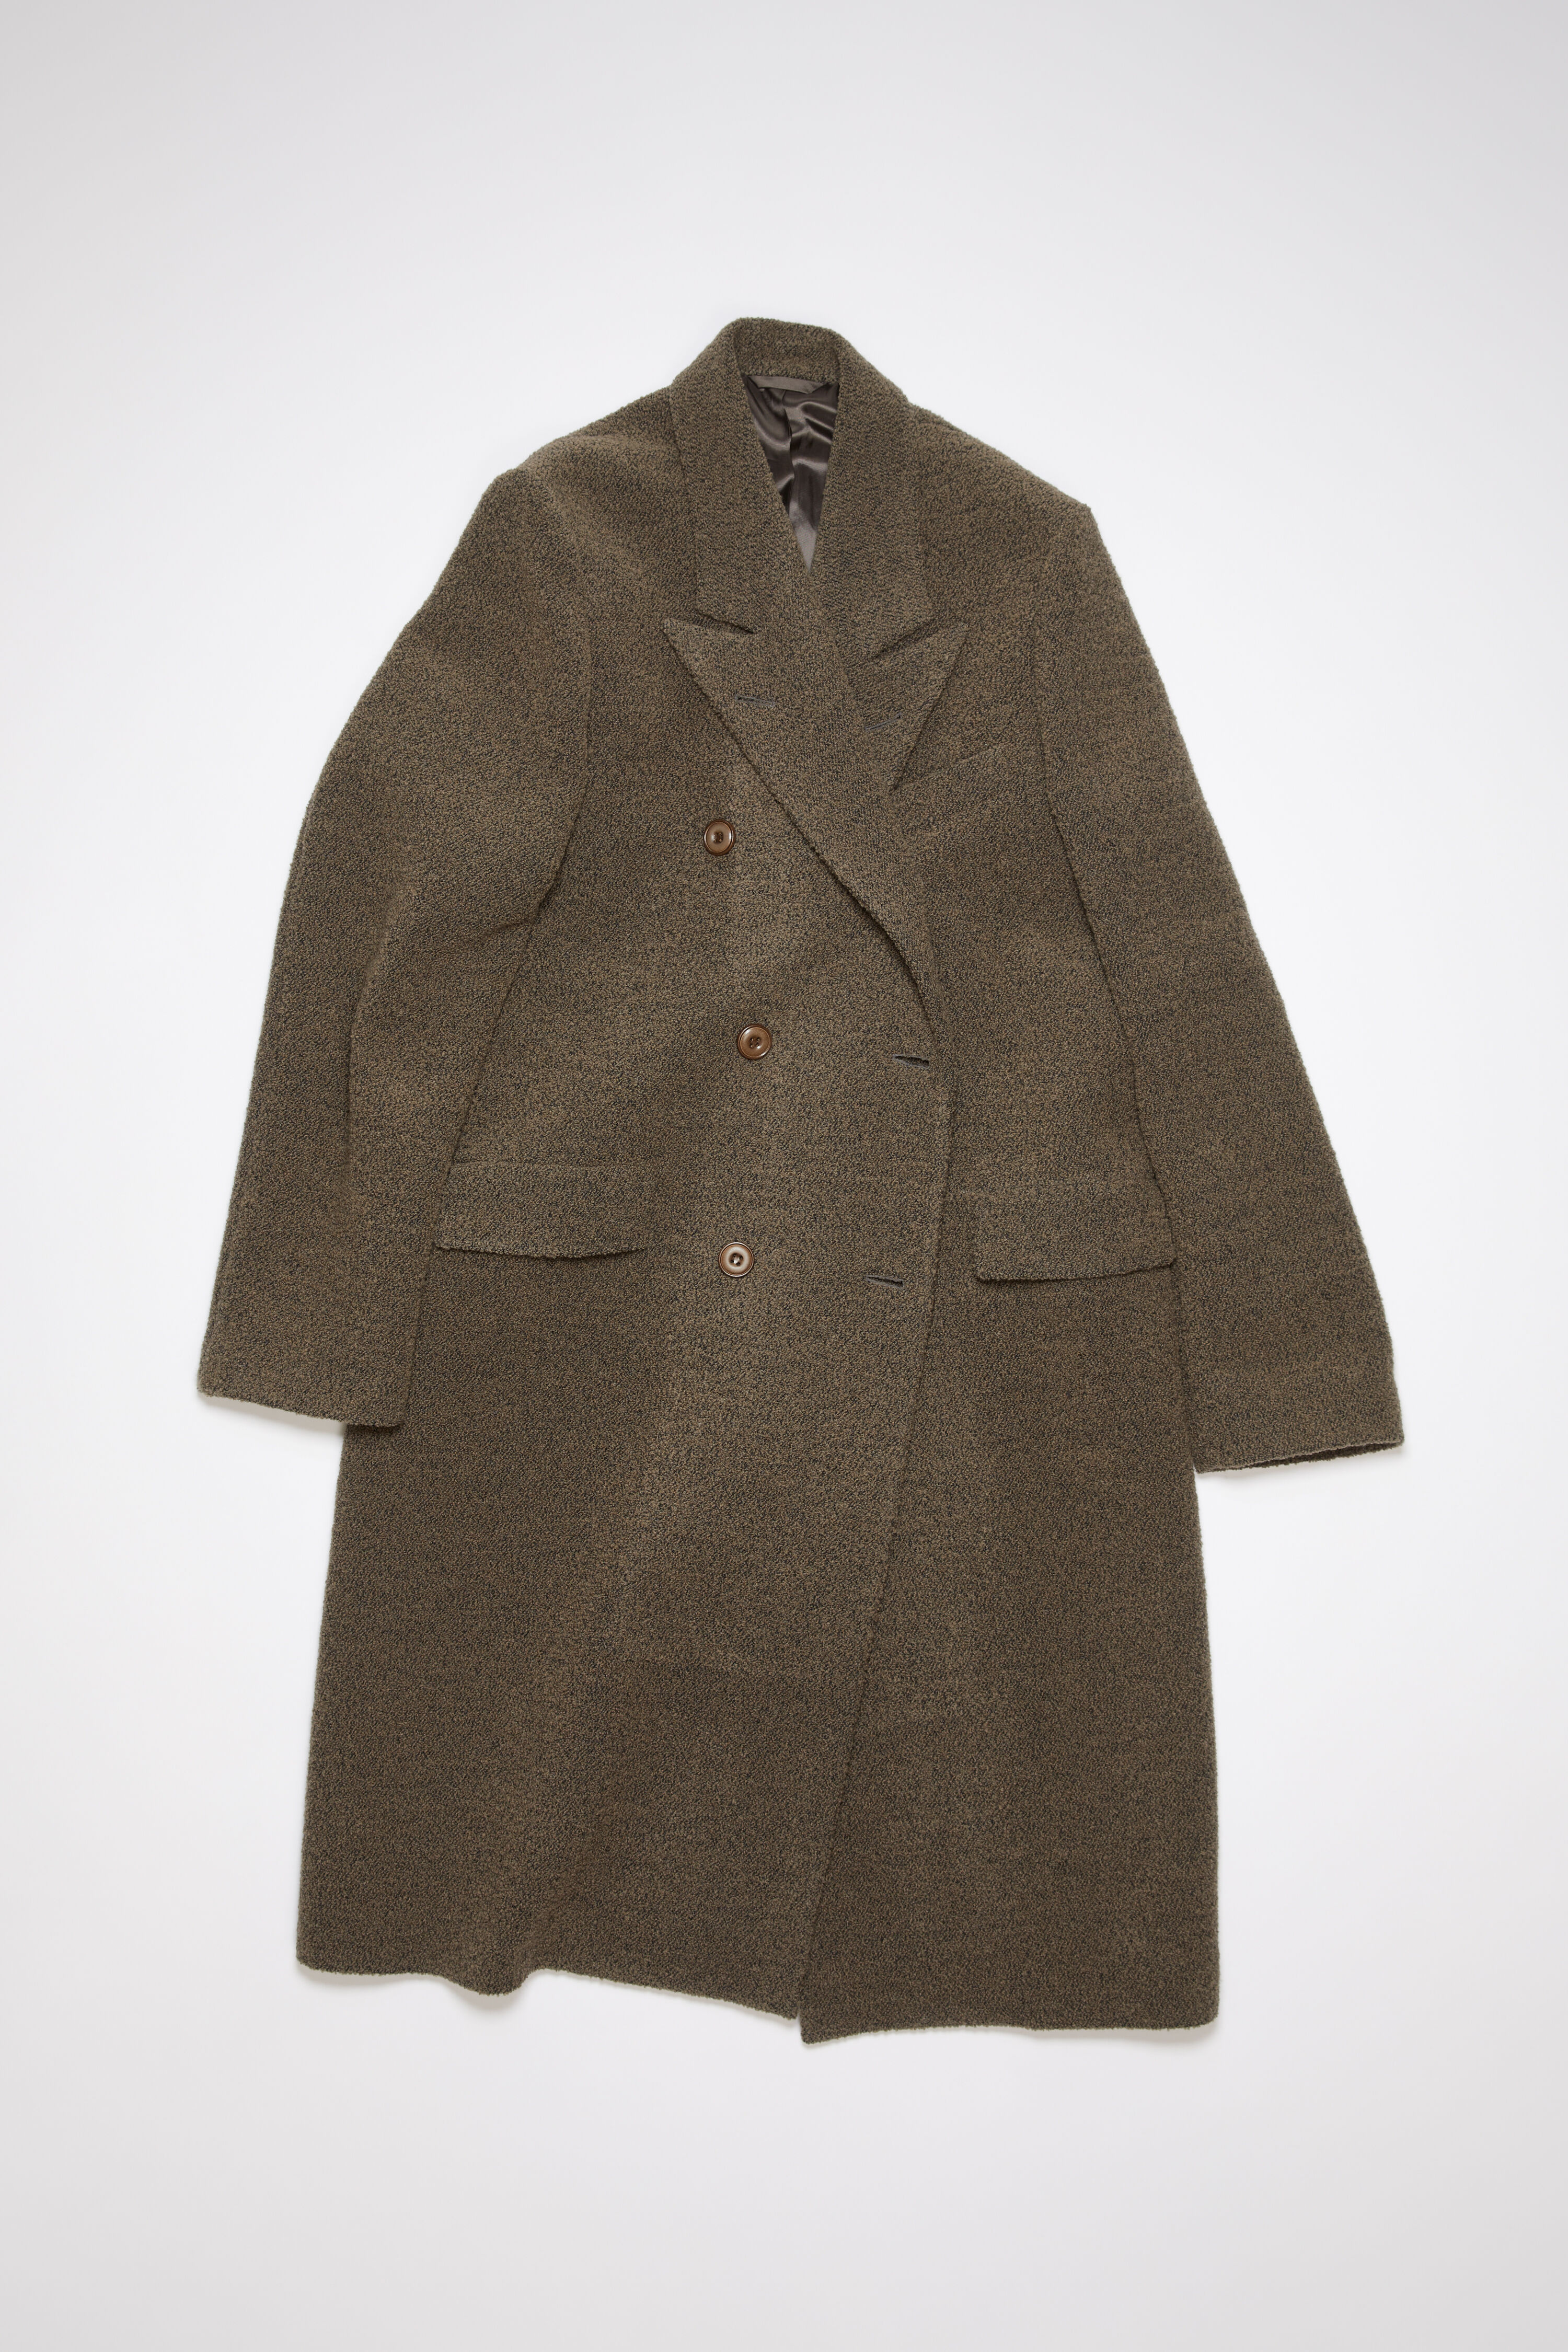 Acne Studios - Double-breasted wool coat - Taupe grey